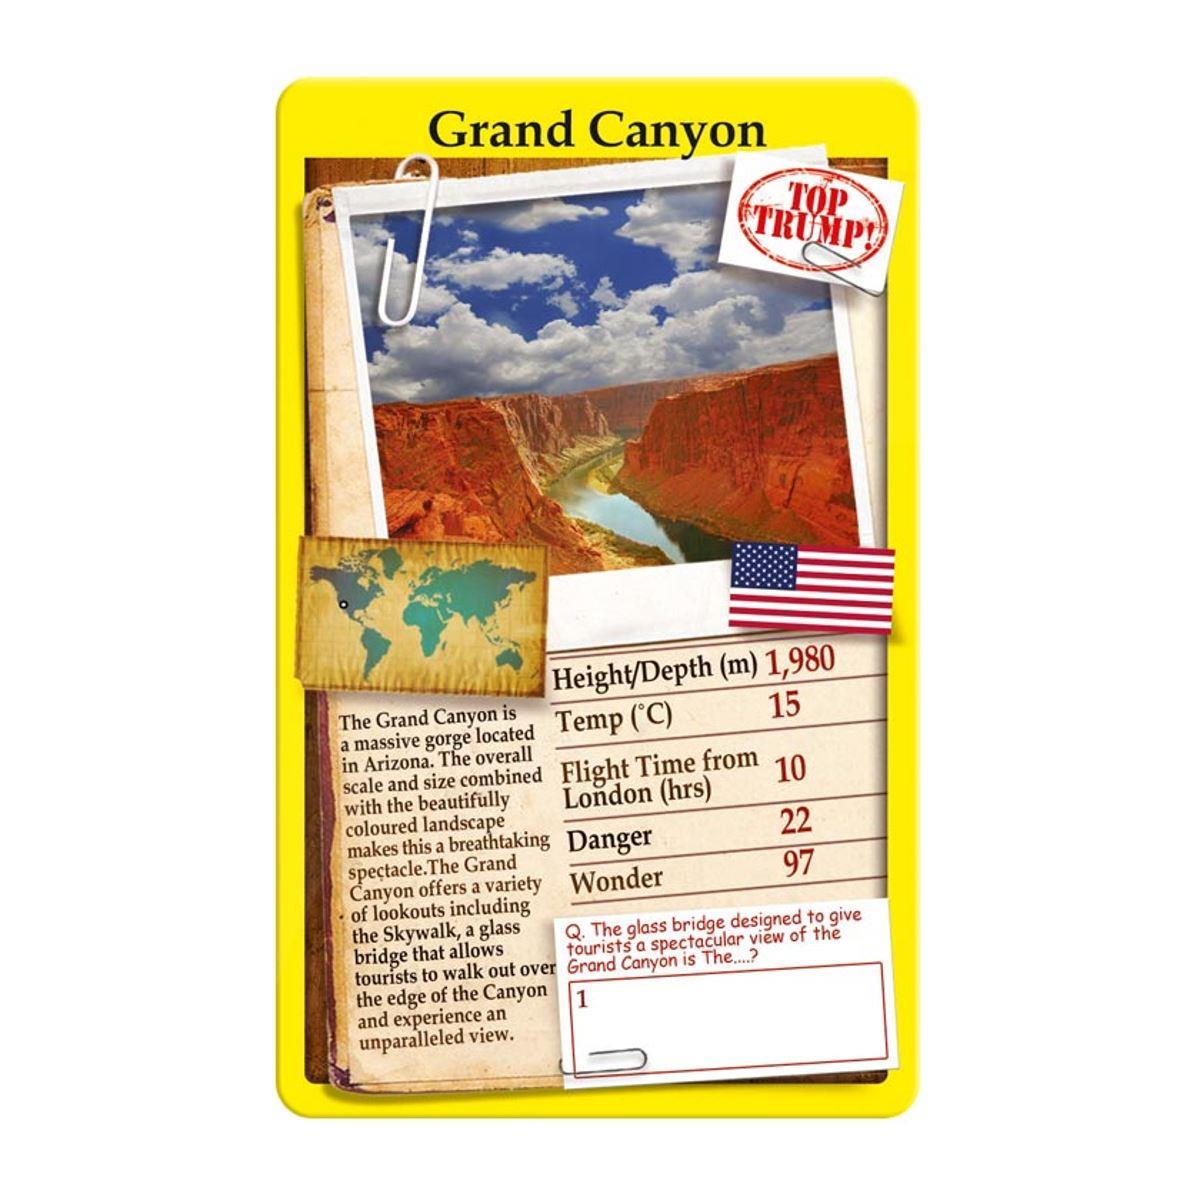 The Wonders of the World Top Trumps Card Game